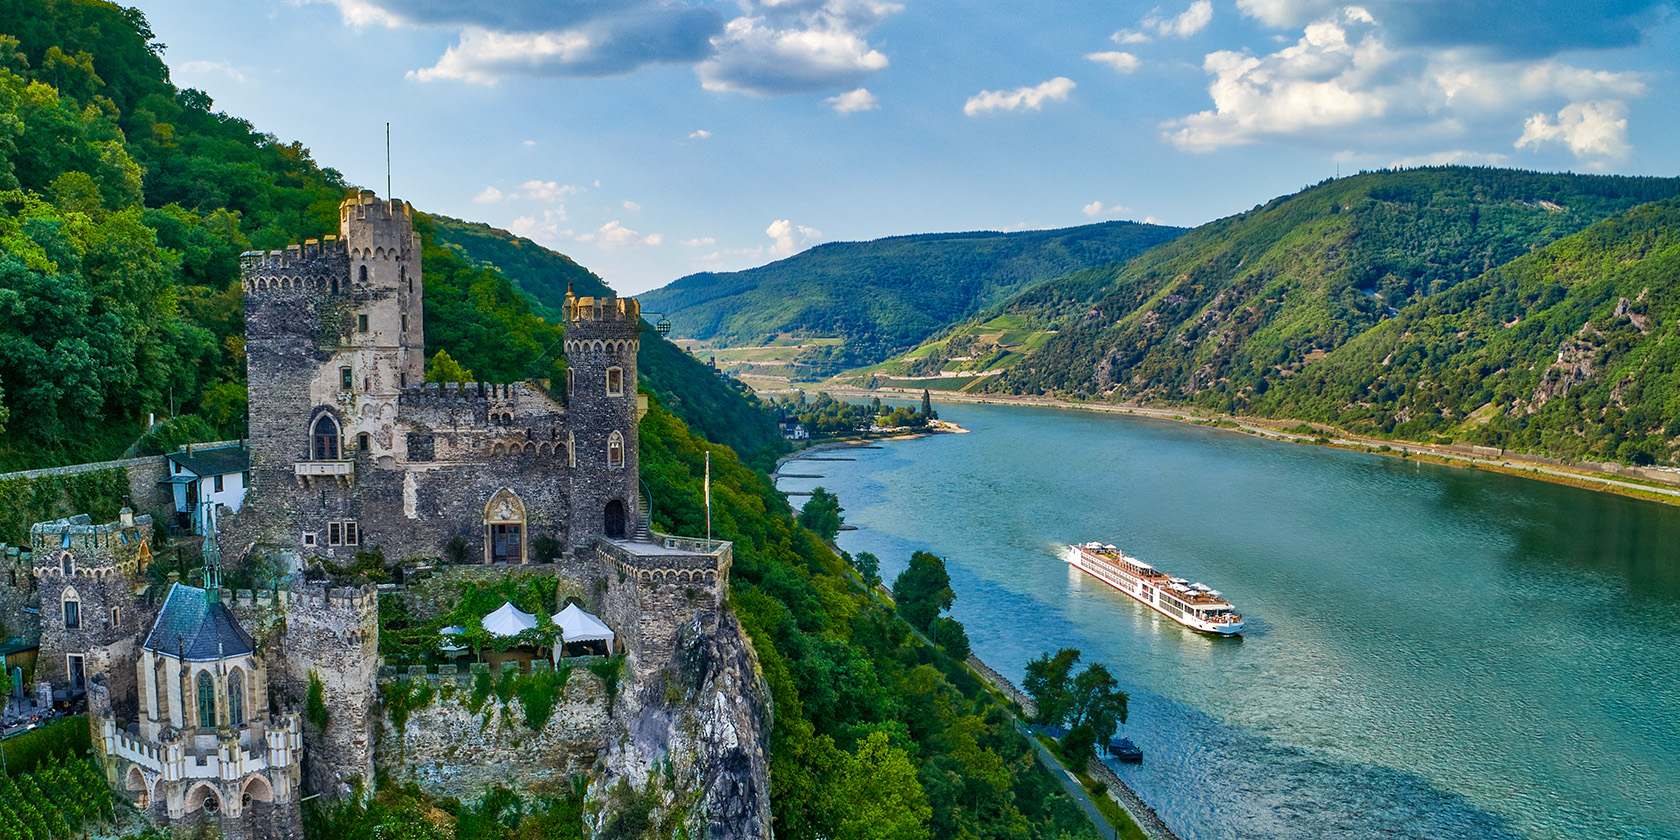 Rhine Gorge: waltzing Along A Musical Cruise with Aussies